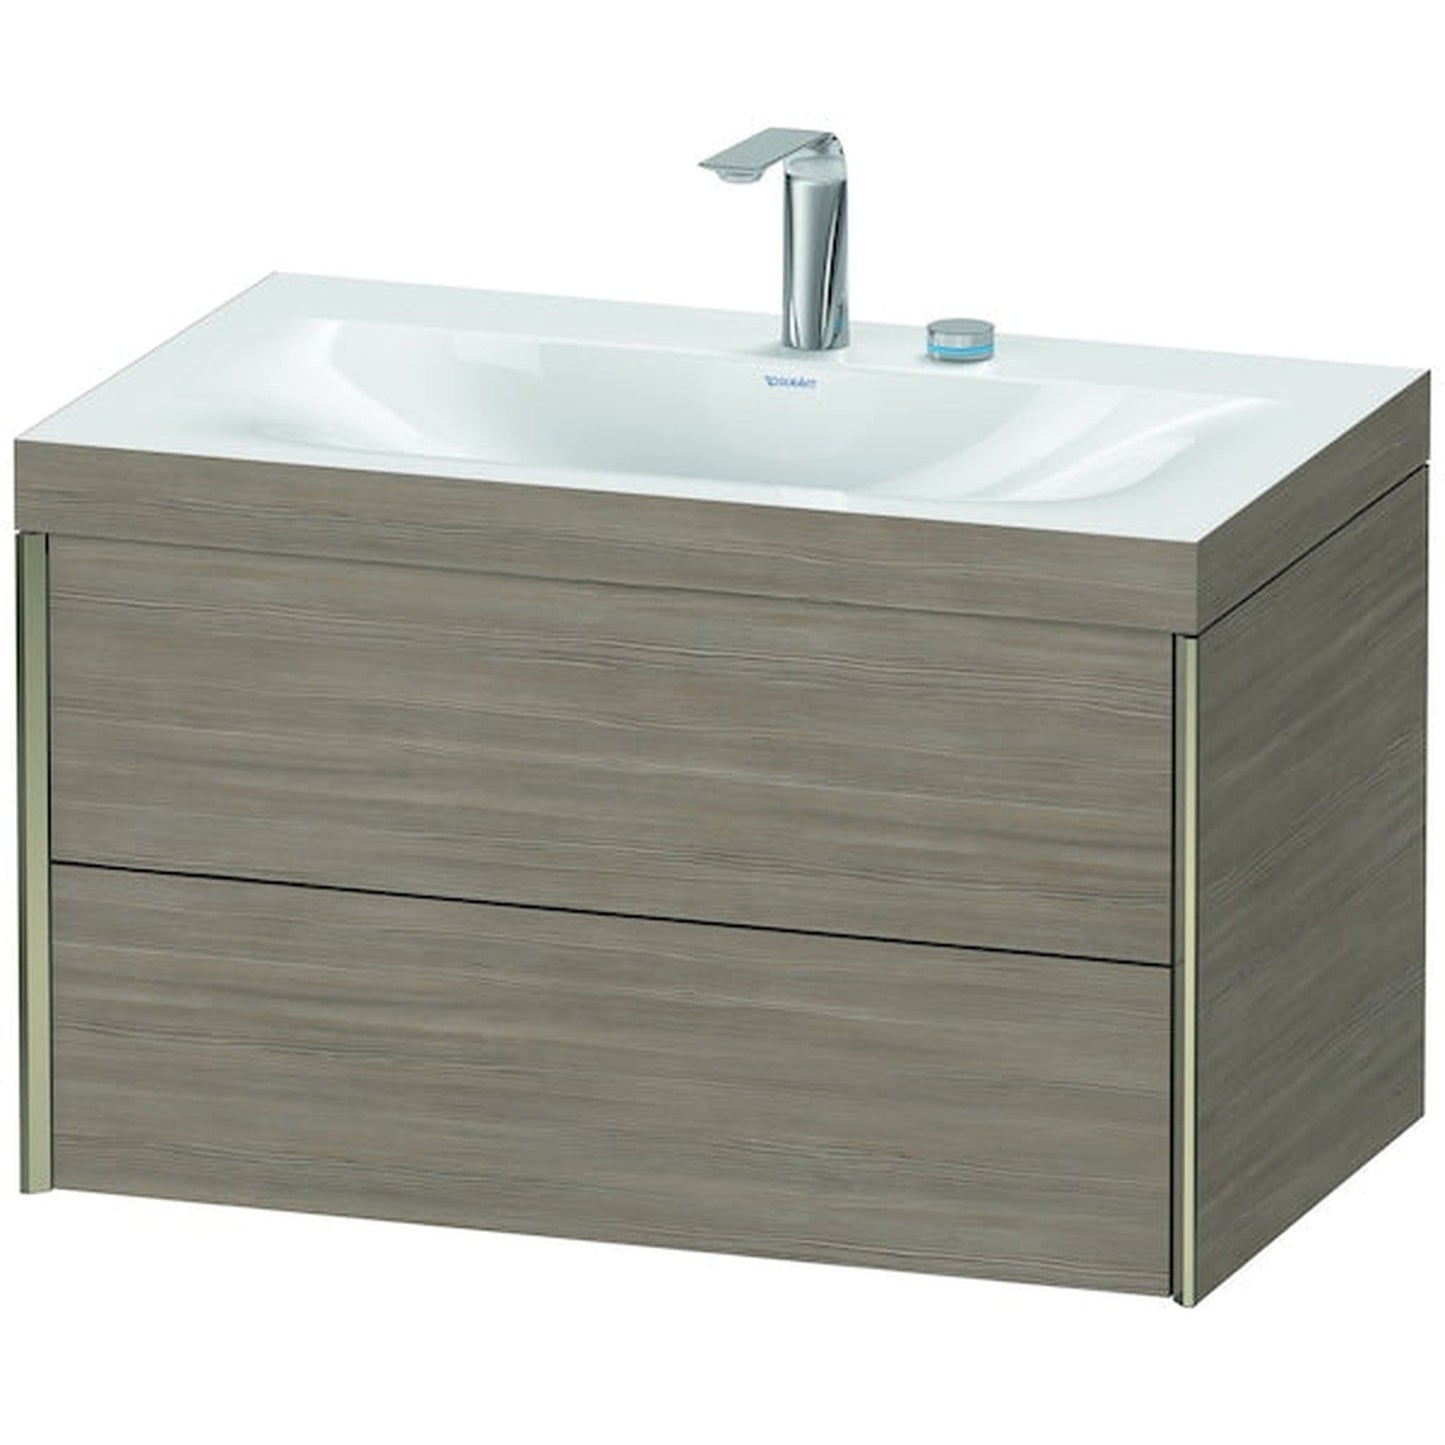 Duravit Xviu 31" x 20" x 19" Two Drawer C-Bonded Wall-Mount Vanity Kit With Two Tap Holes, Silver Pine (XV4615EB131C)